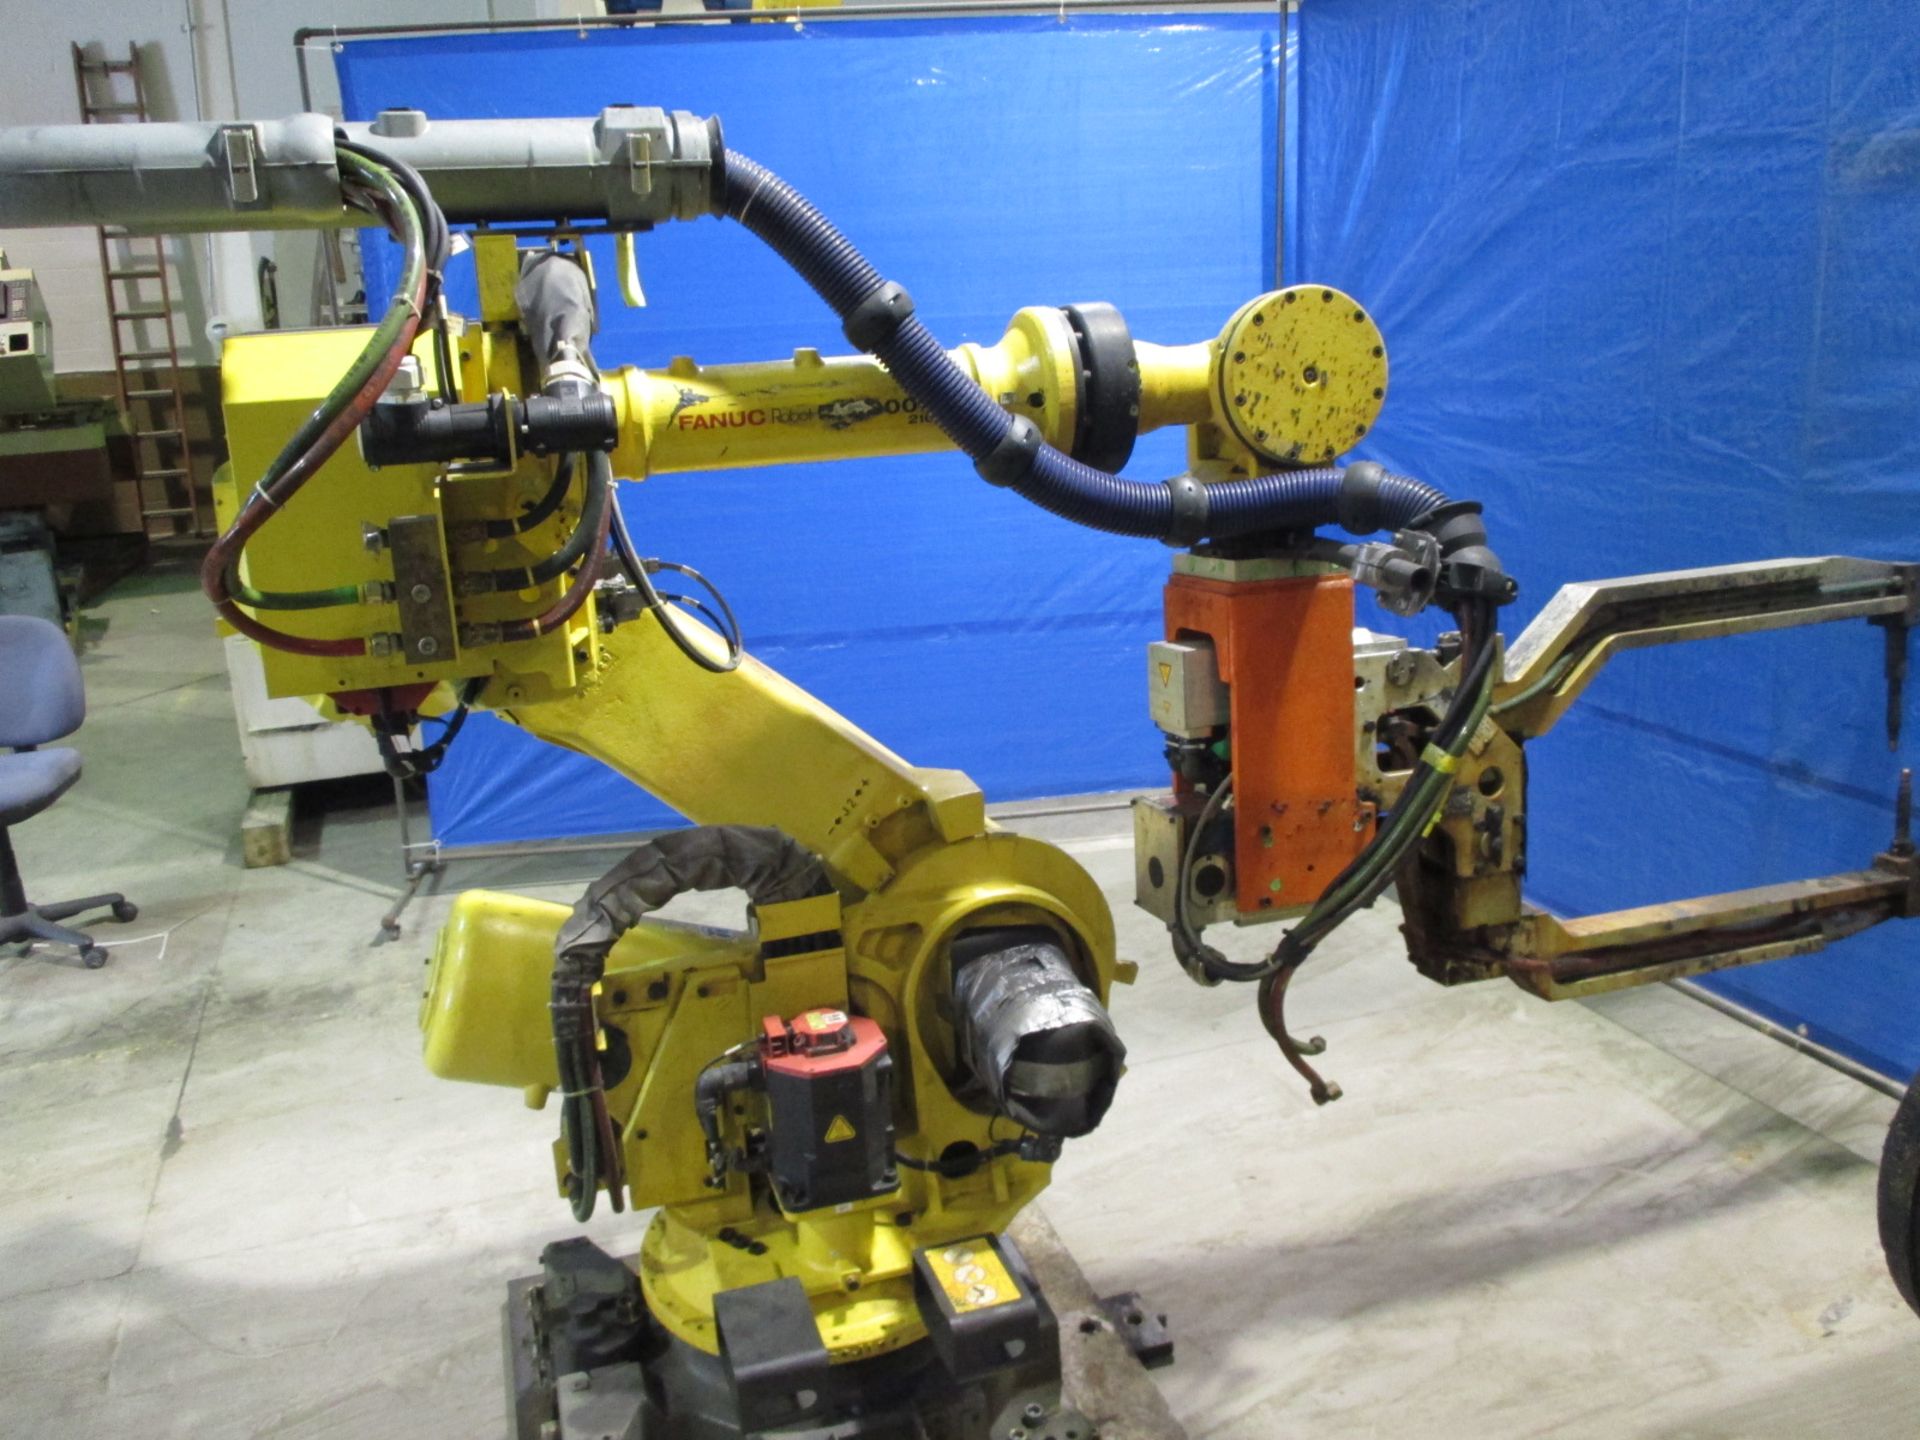 FANUC R-2000iB/210F WITH R-J3iC CONTROL SN 82092, INCLUDES THE TEACH PENDANT, CABLES